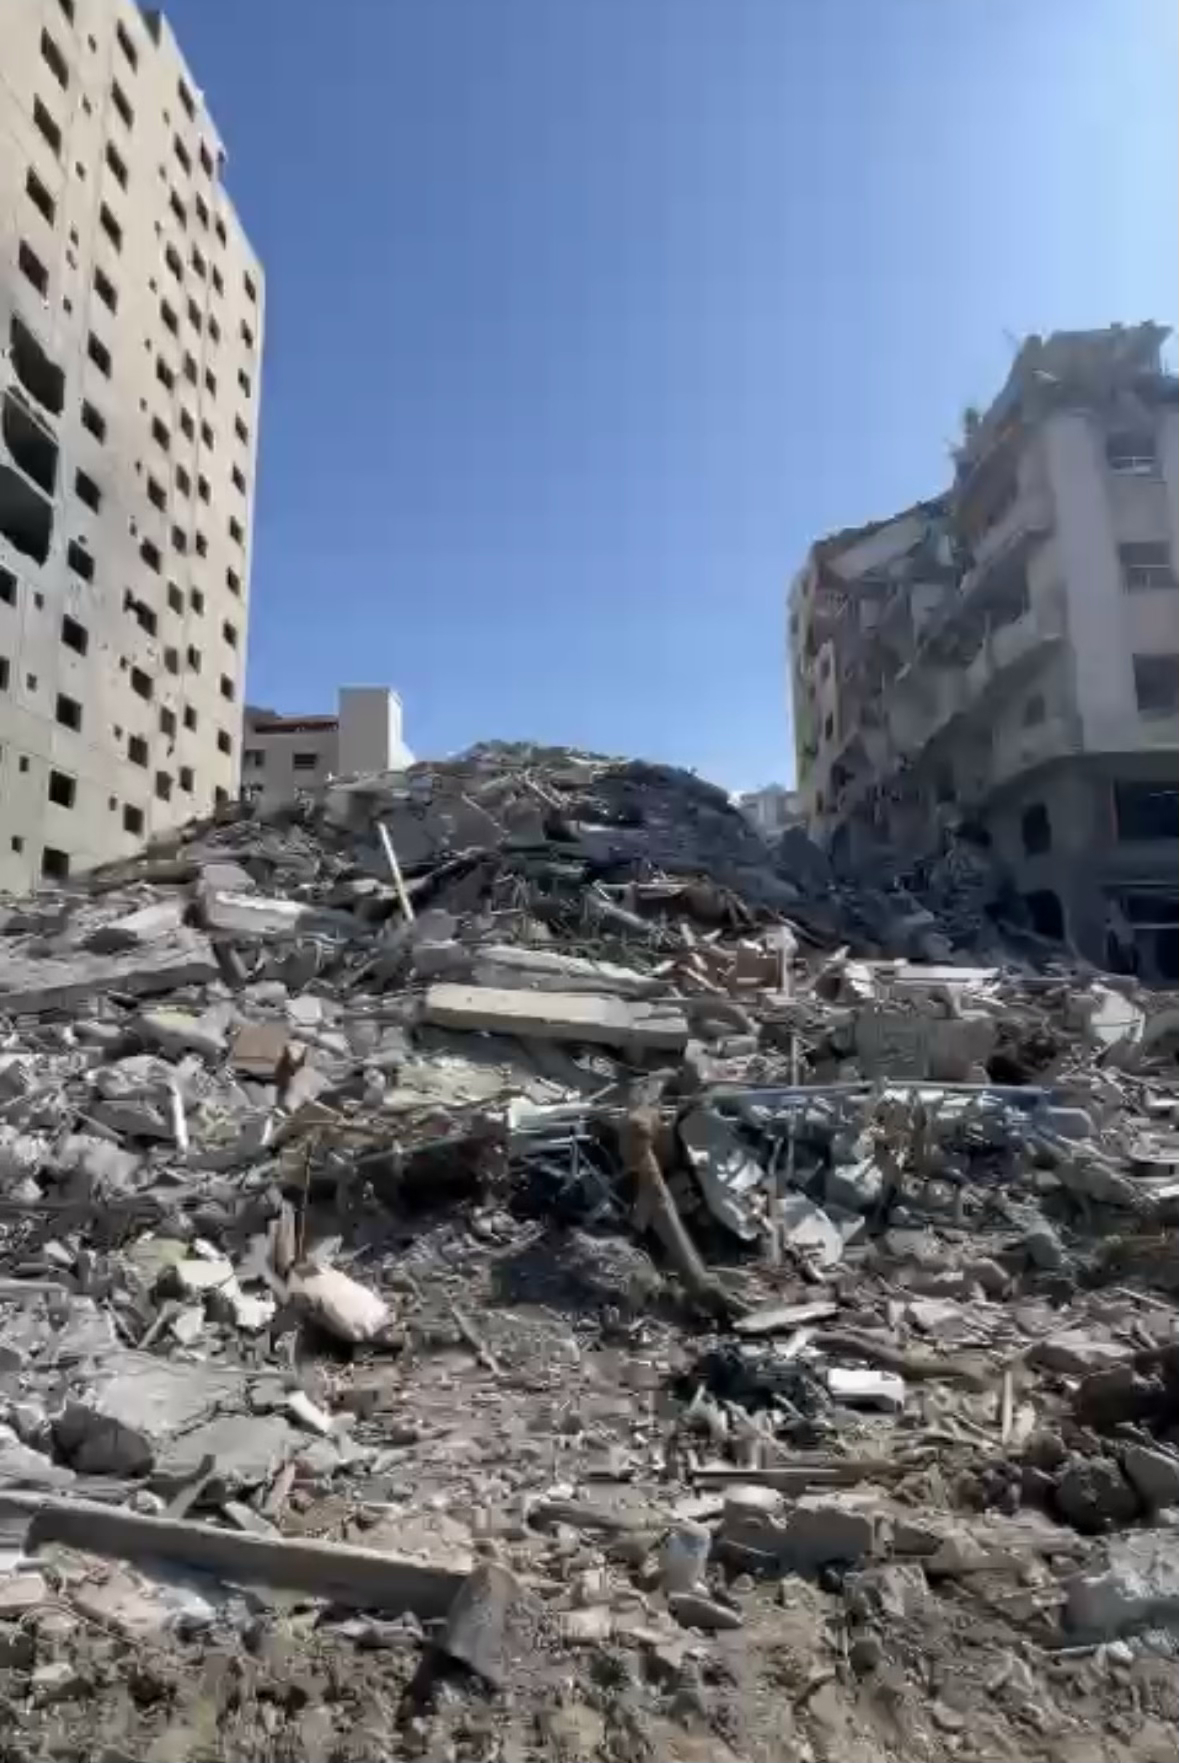 A pile of rubble with damaged buildings in the background under a clear blue sky.